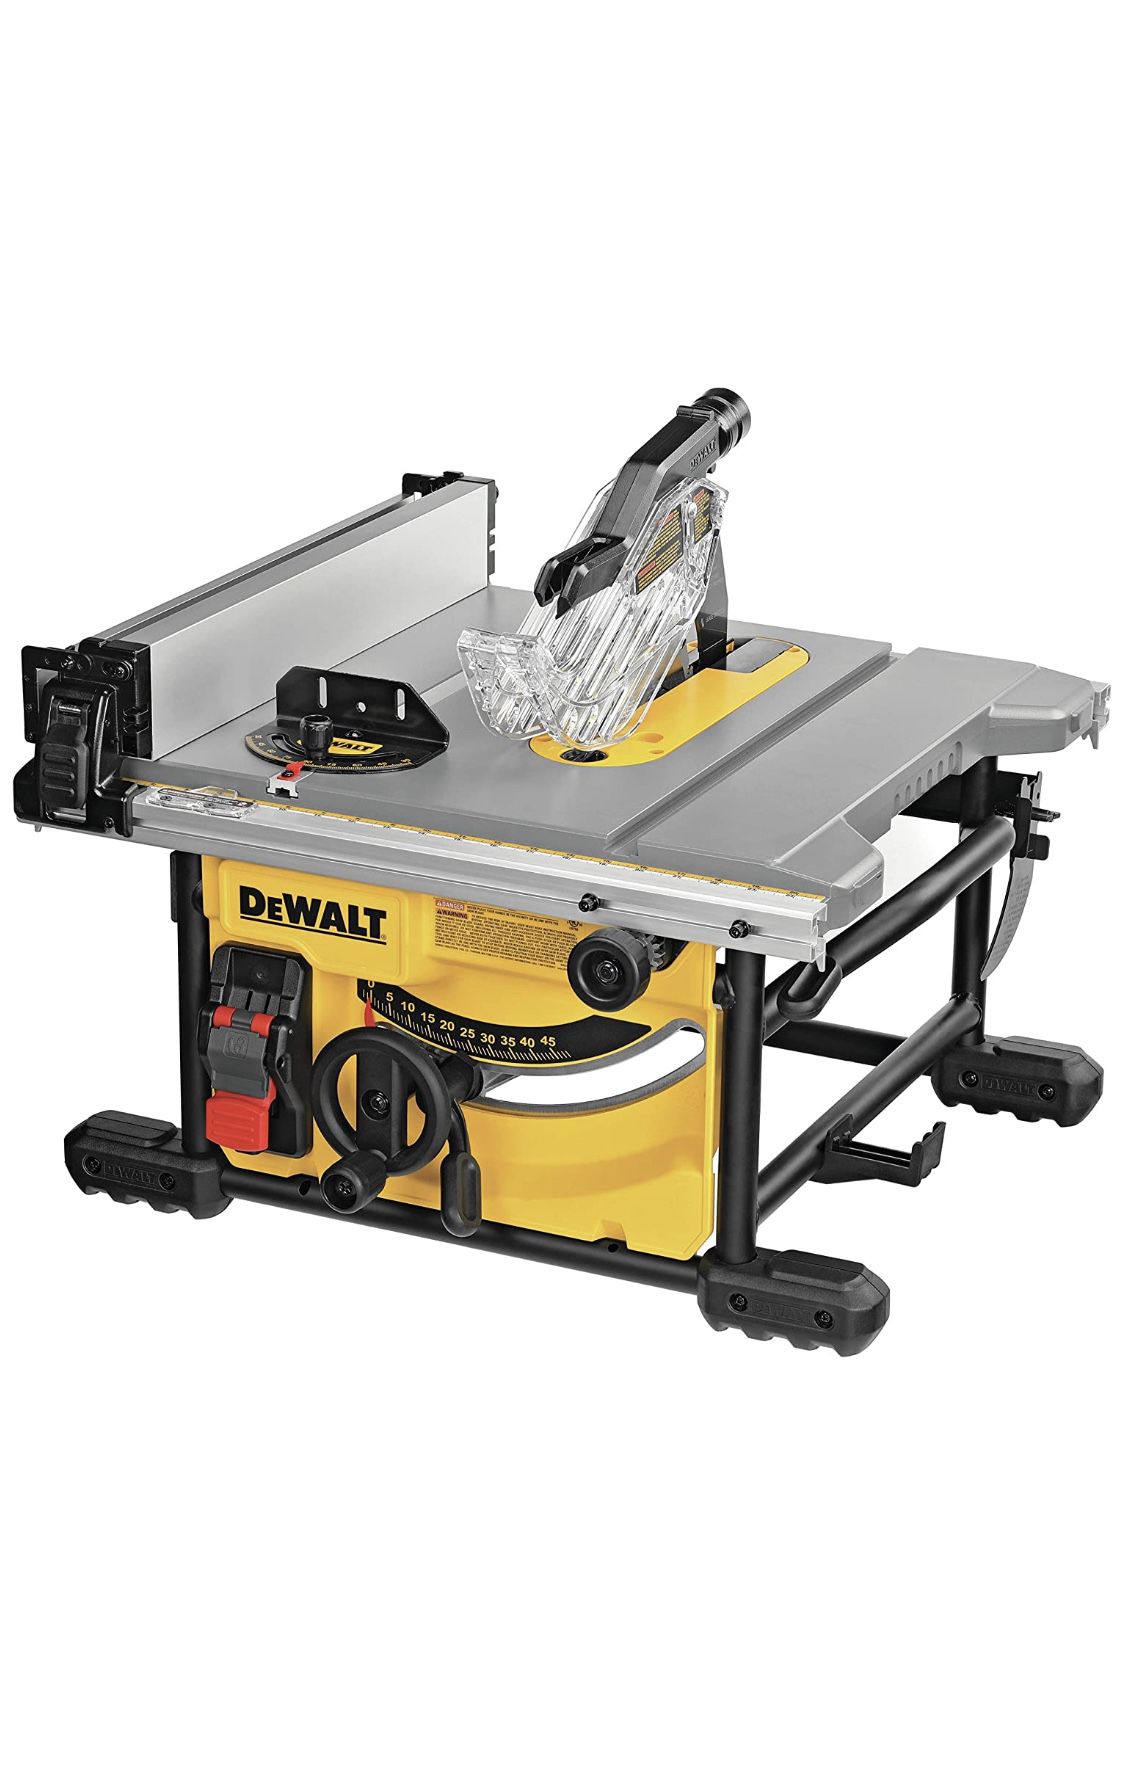 DEWALT (BRAND NEW) Table Saw for Jobsite, Compact, 8-1/4-Inch & Table Saw Stand, Mobile/Rolling